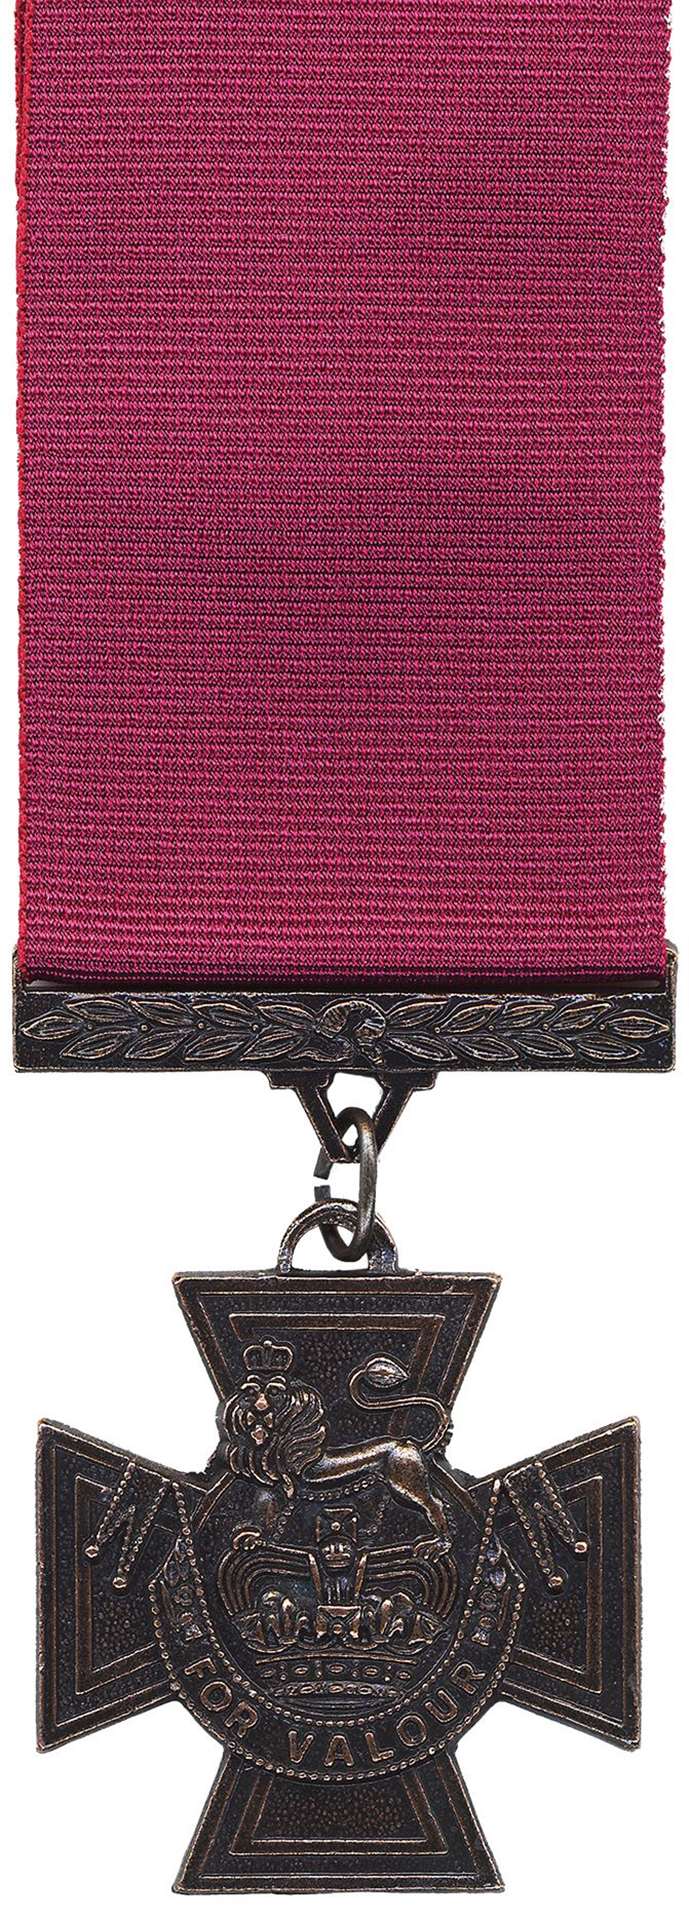 The Victoria Cross is awarded to those who "show valour in the presence of the enemy"